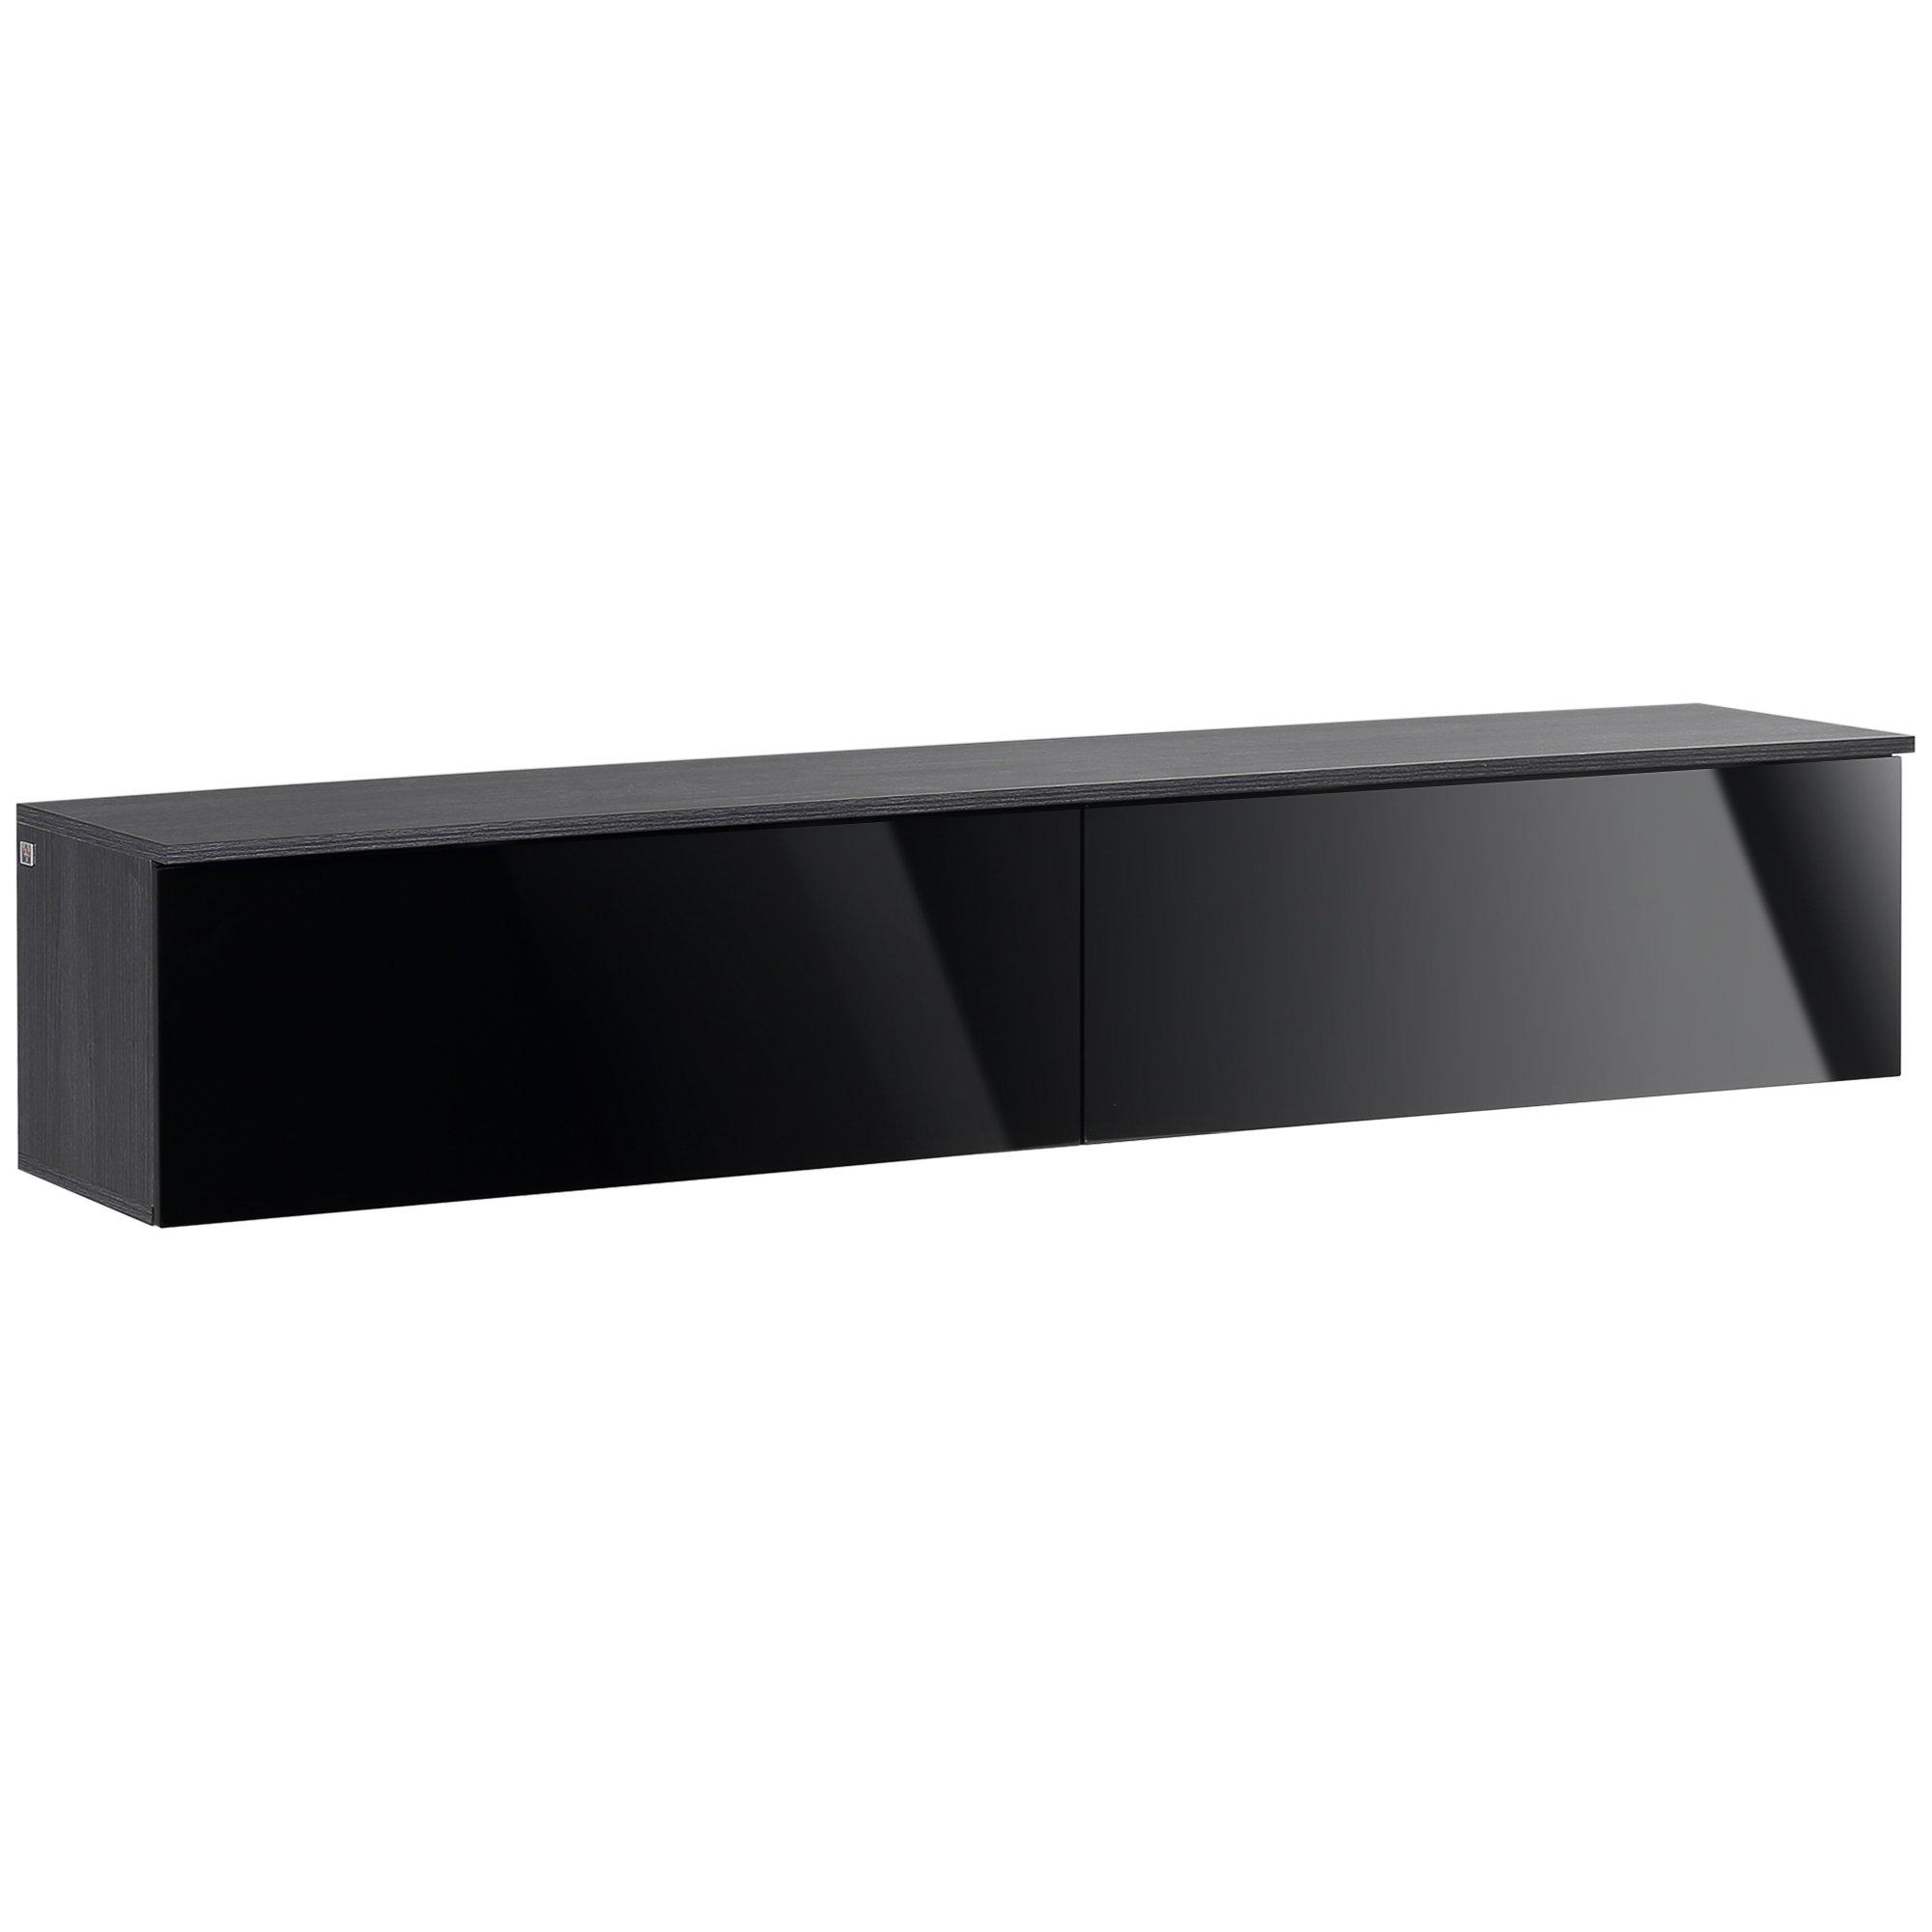 Floating TV Unit Stand Wall Mount Media Console with Storage Cupboards